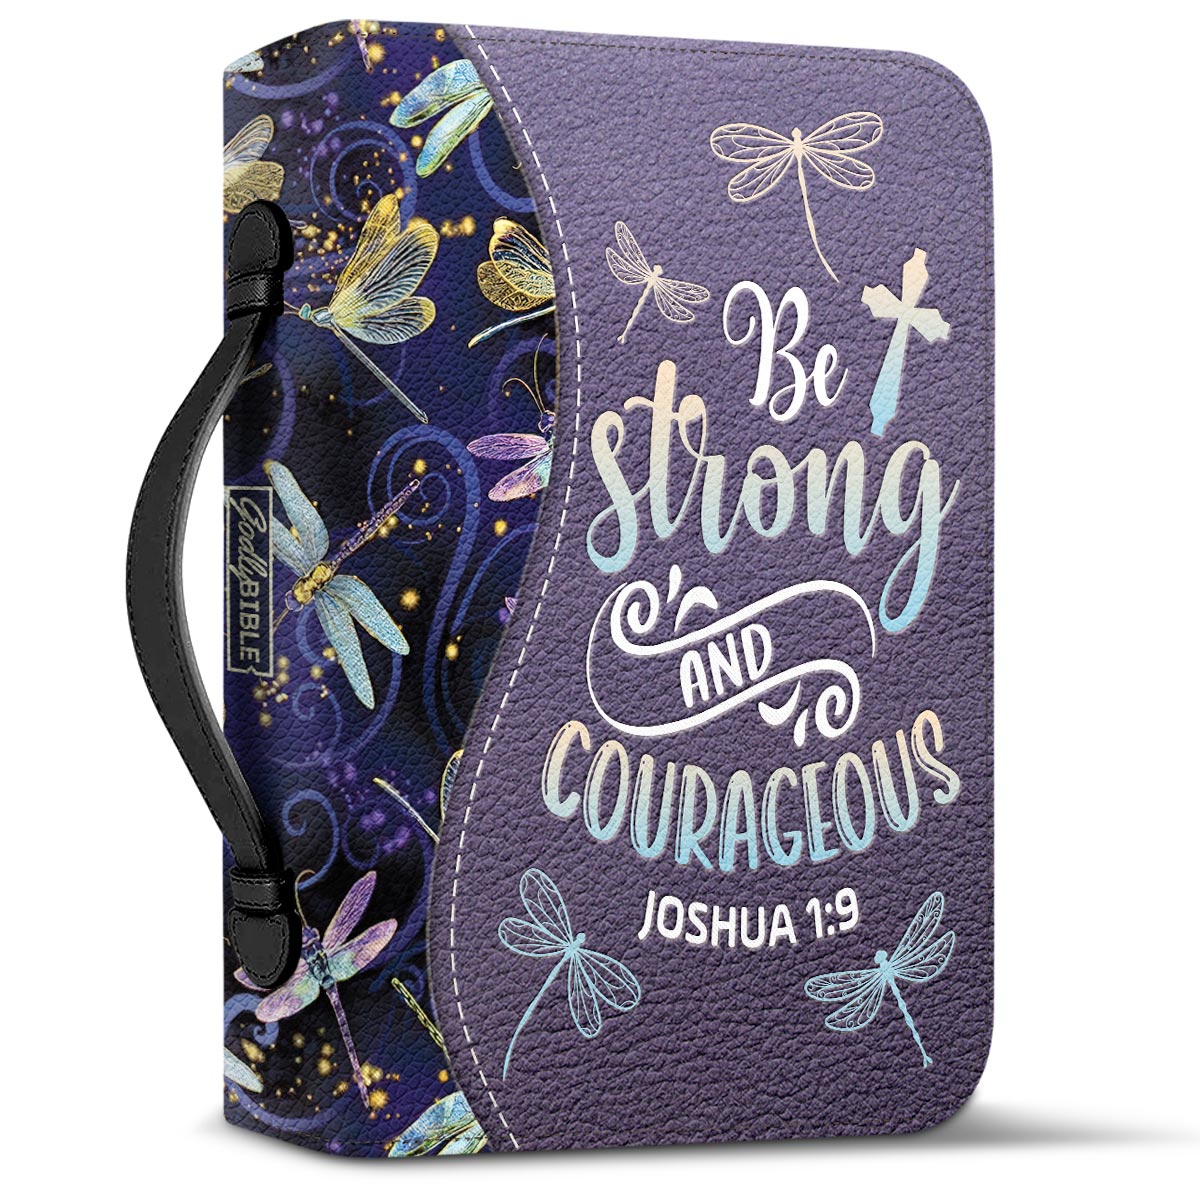  Personalized Bible Cover - Joshua 1 9 Be Strong And Courageous Dragonfly Bible Cover for Christians